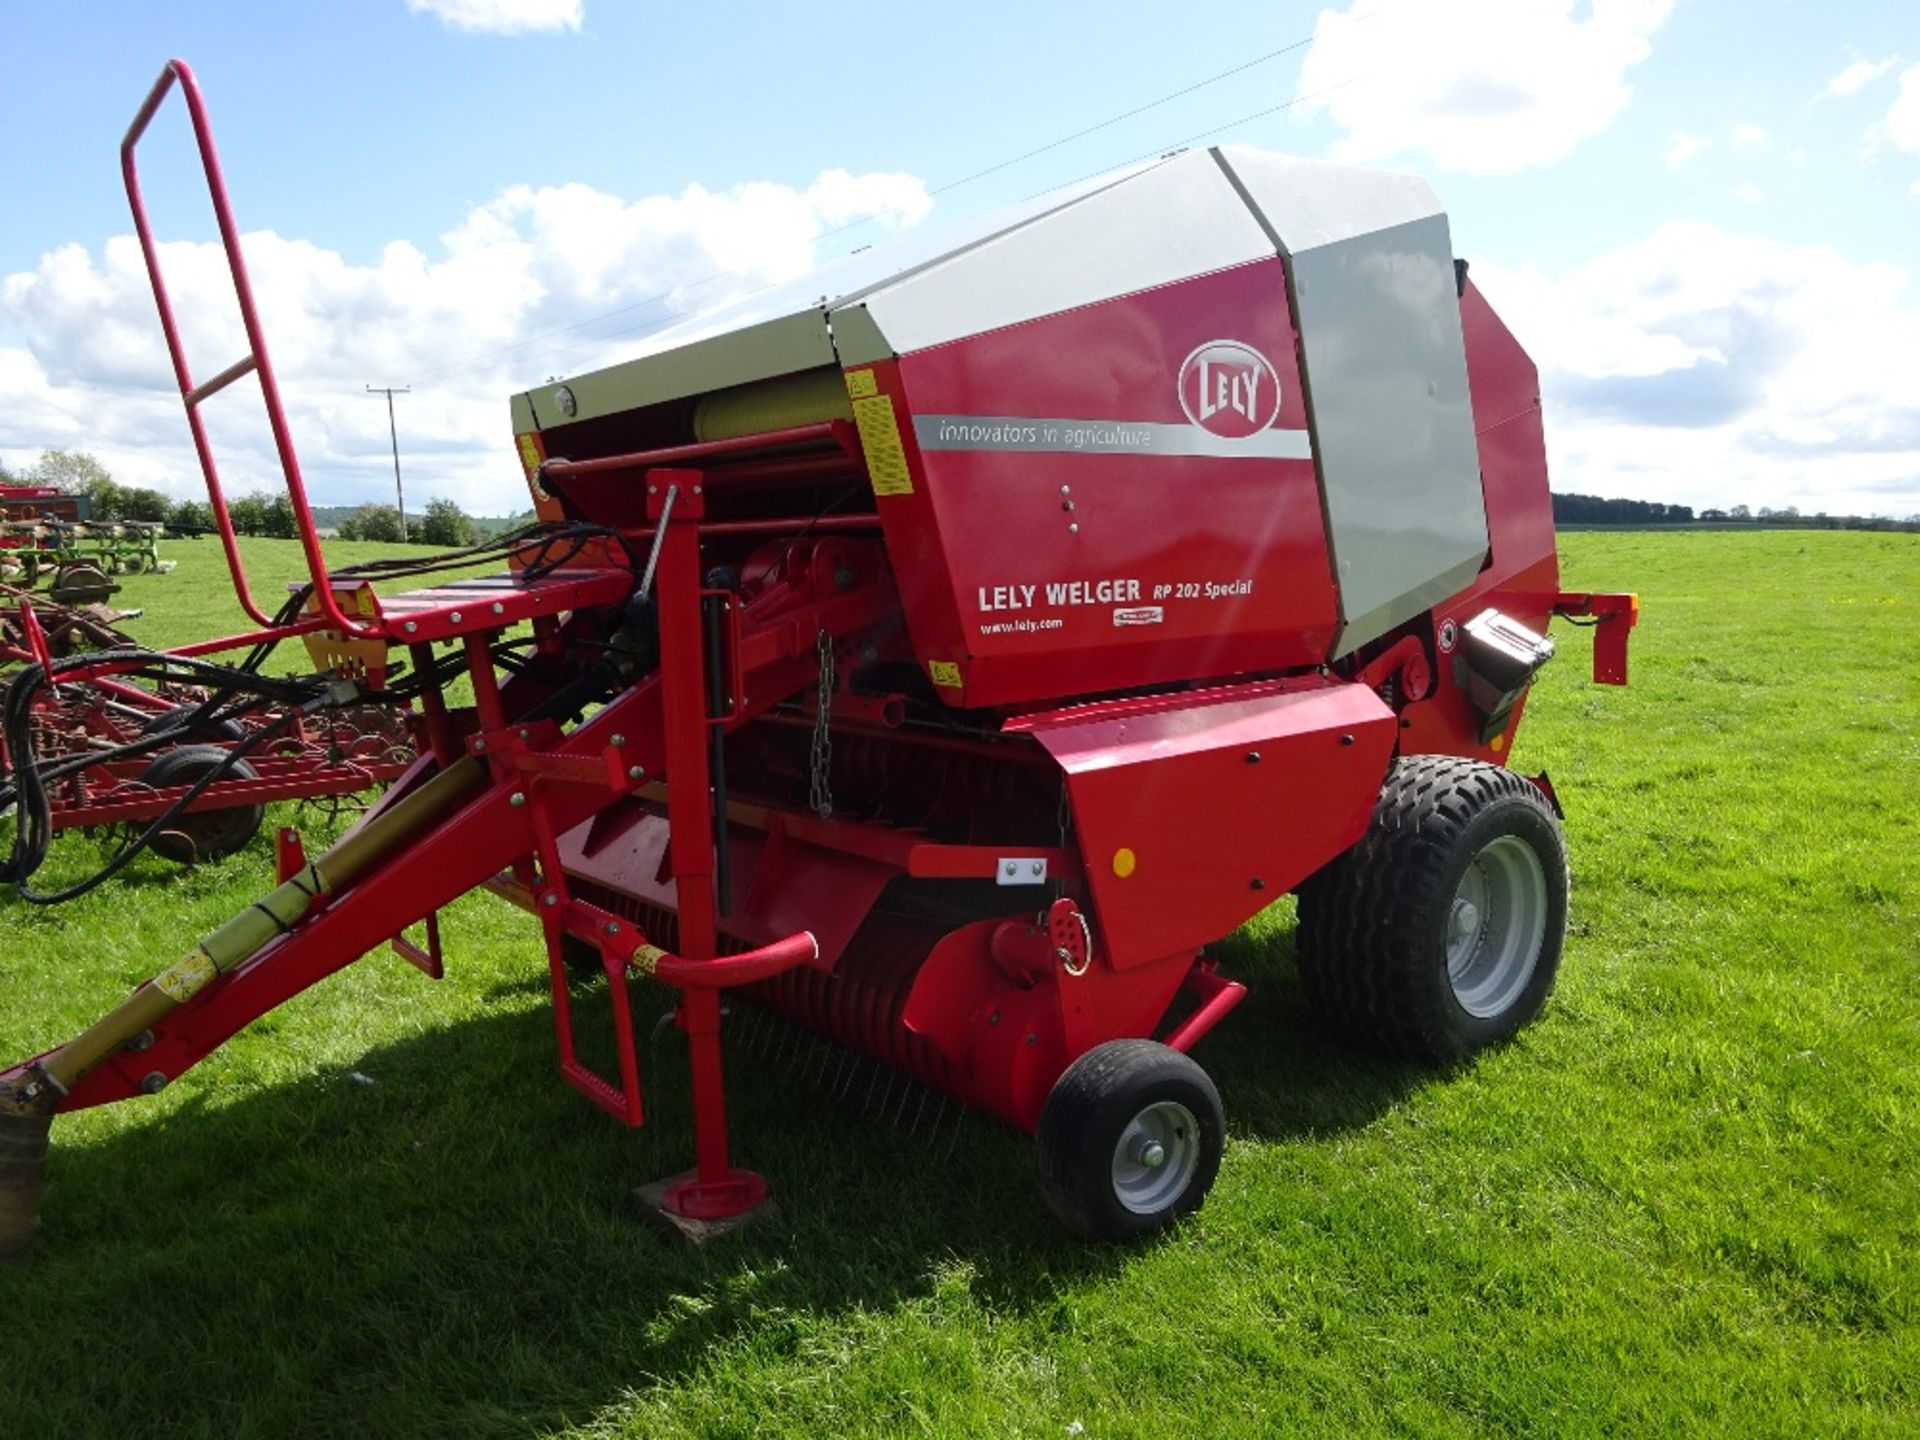 LELY WELGER RP 202 SPECIAL ROUND BALER C/W WIDE-ANGLE PTO SHAFT, 1.7 M PICK UP, WIDE TYRES.APPROX